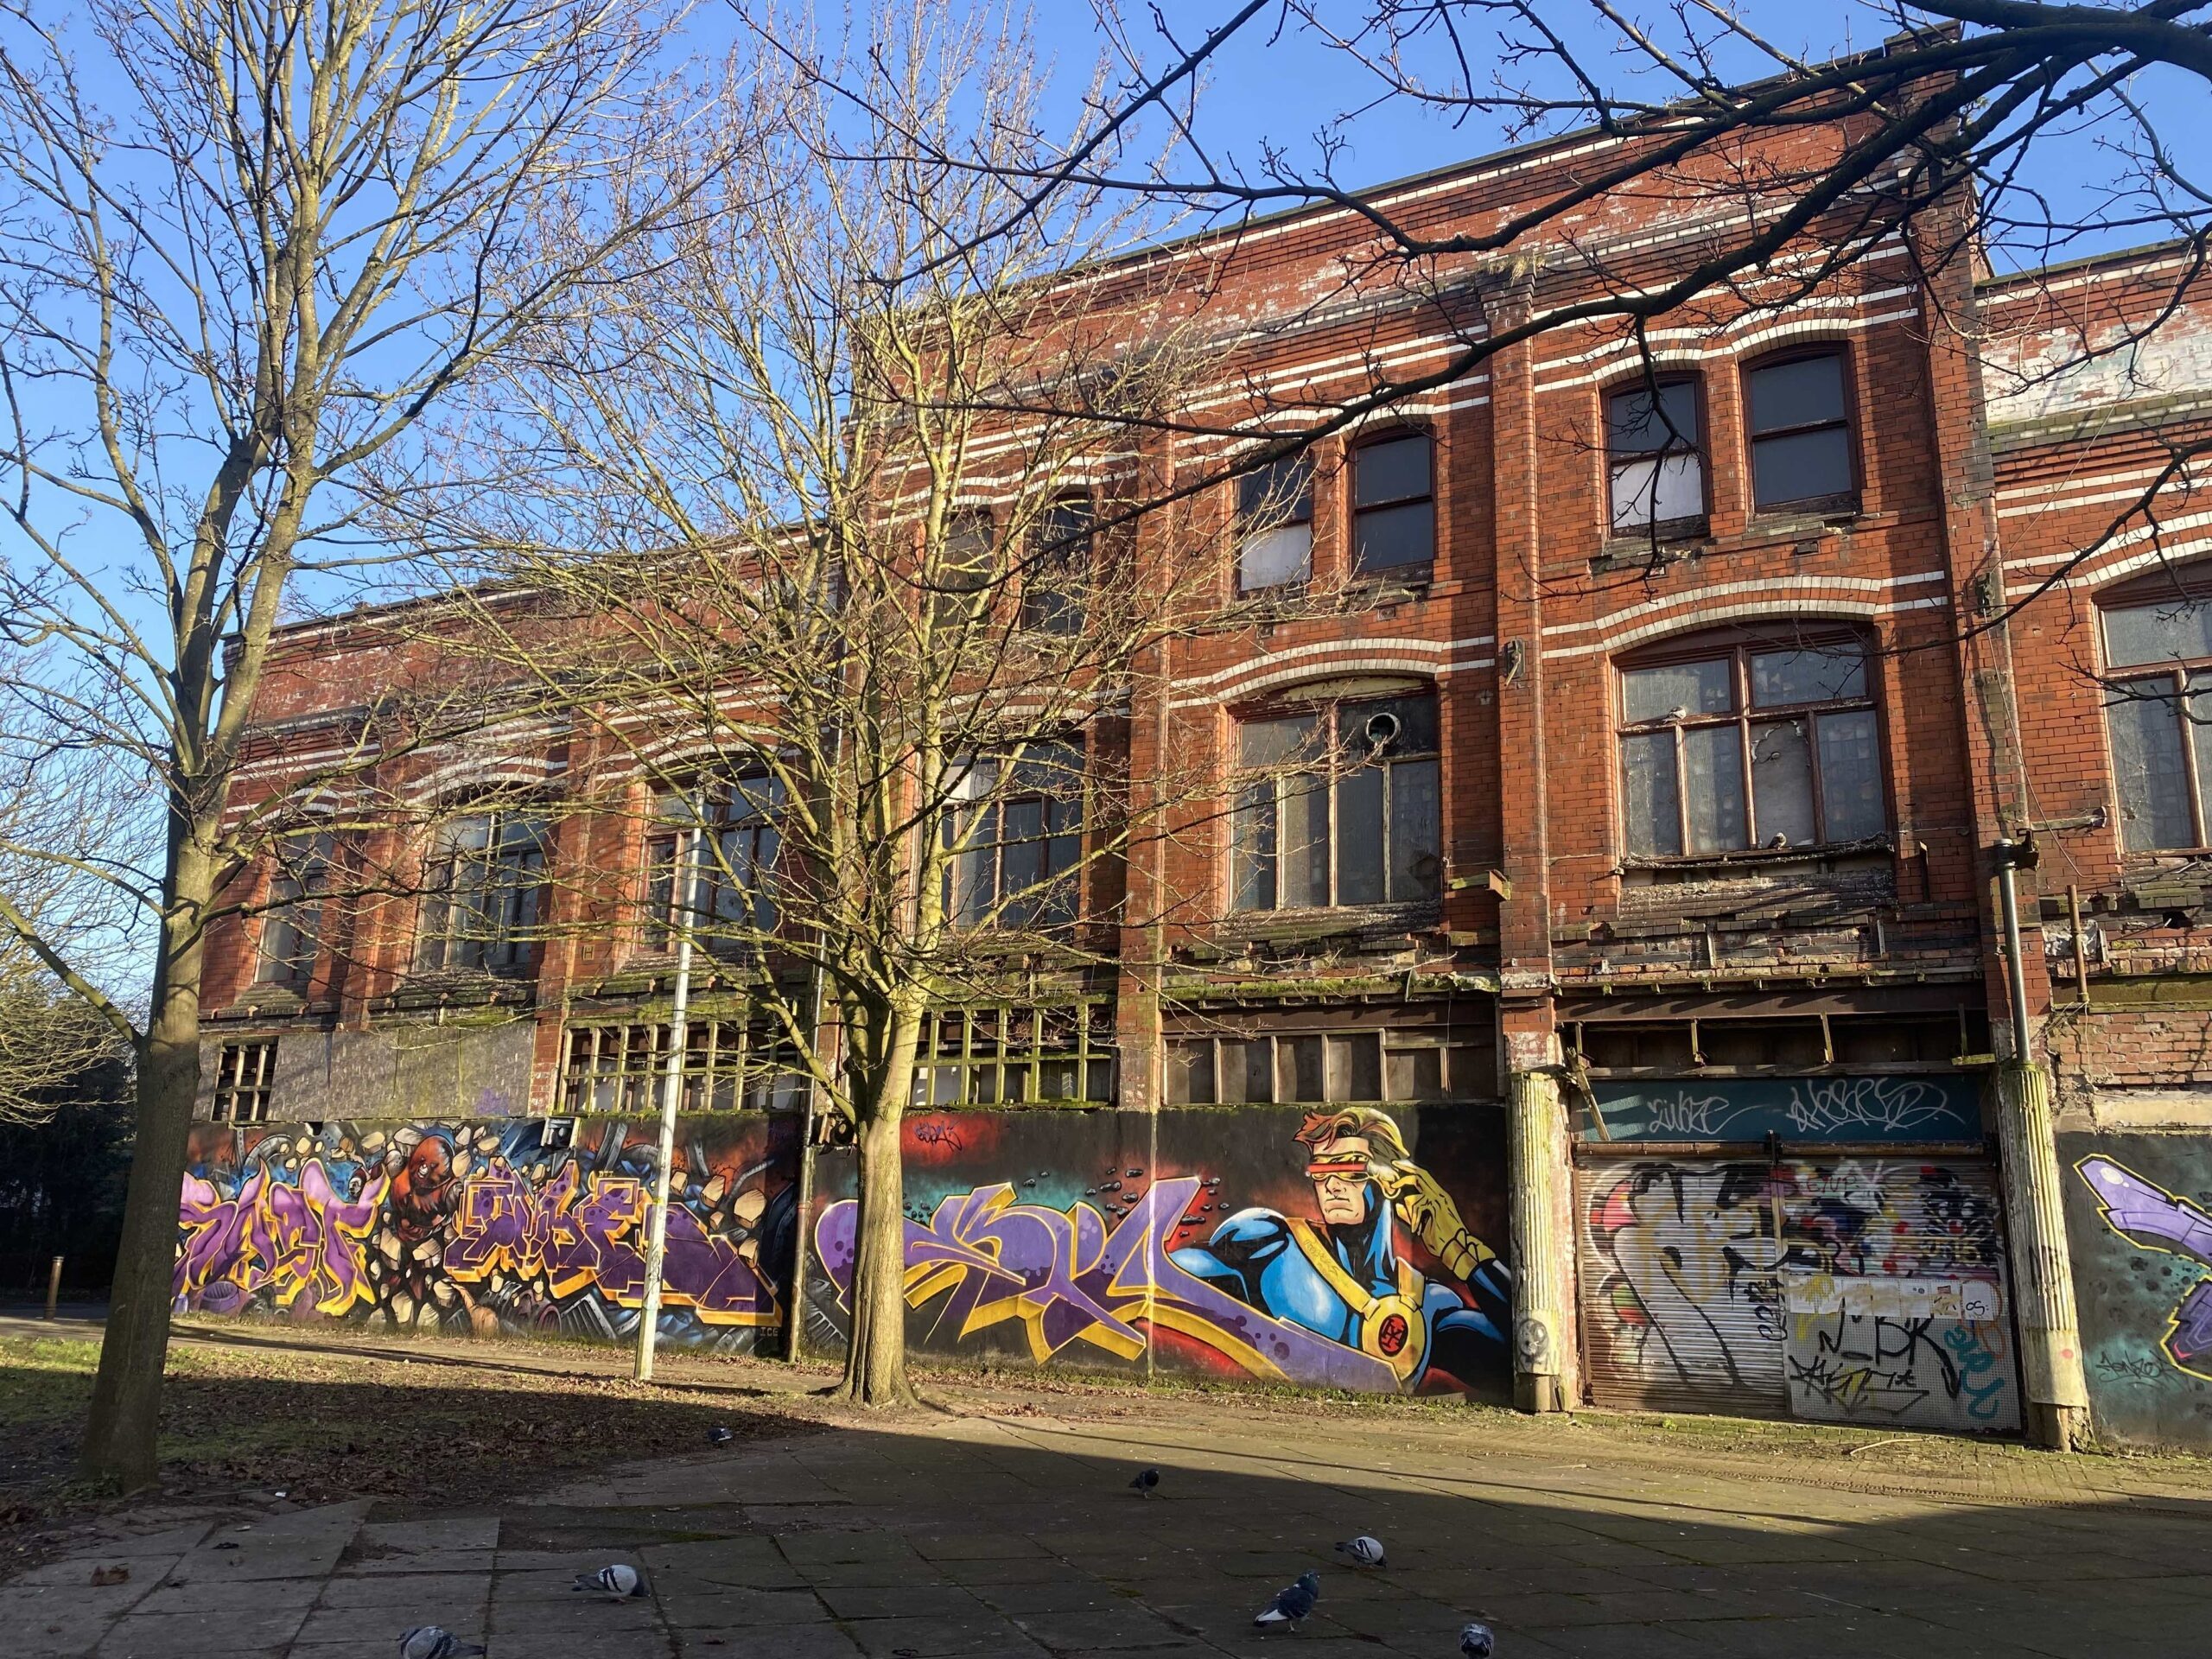 Graffitied and neglected front side of Hulme Hippodrome, with trees in front, on a sunny day